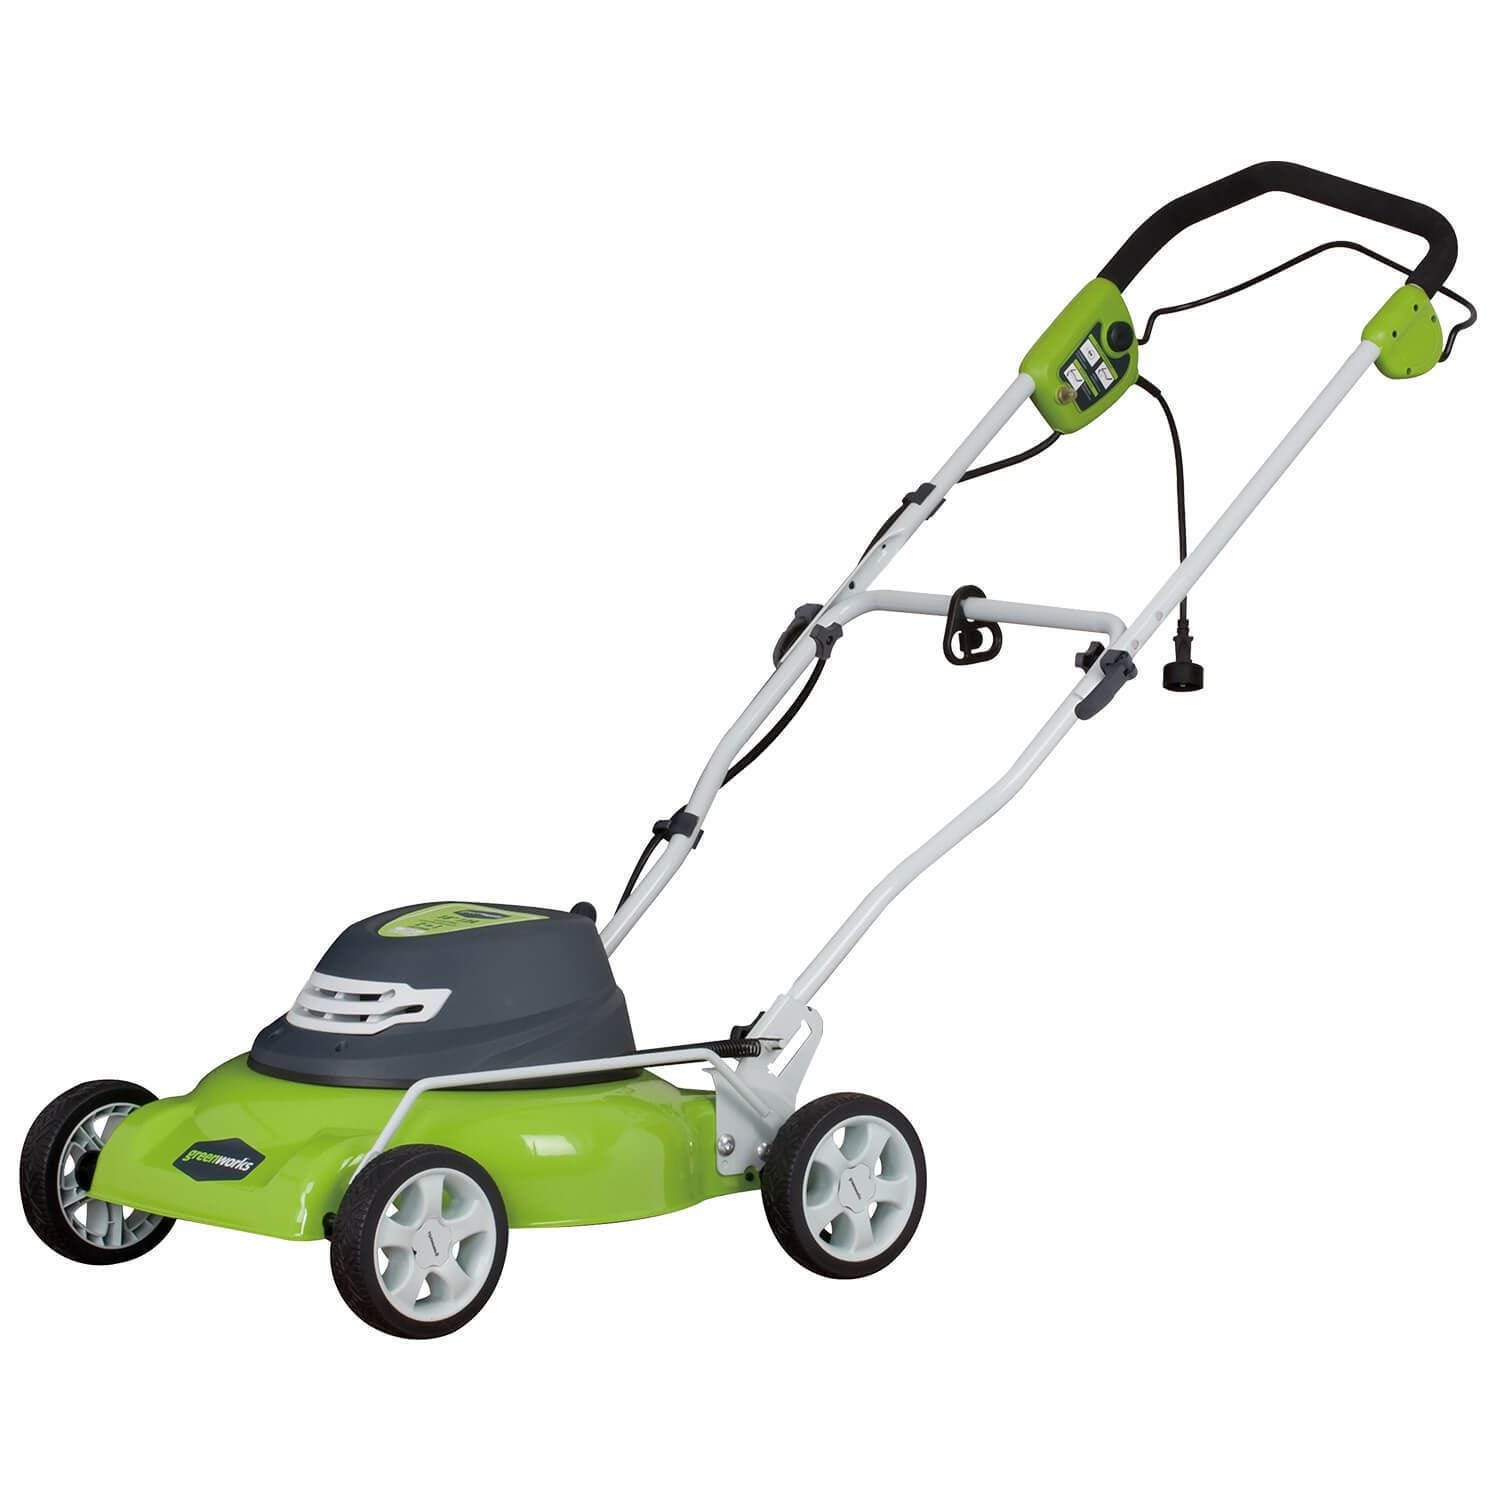 Greenworks 18" Corded Electric 12 Amp Push Lawn Mower 25012 - image 1 of 6